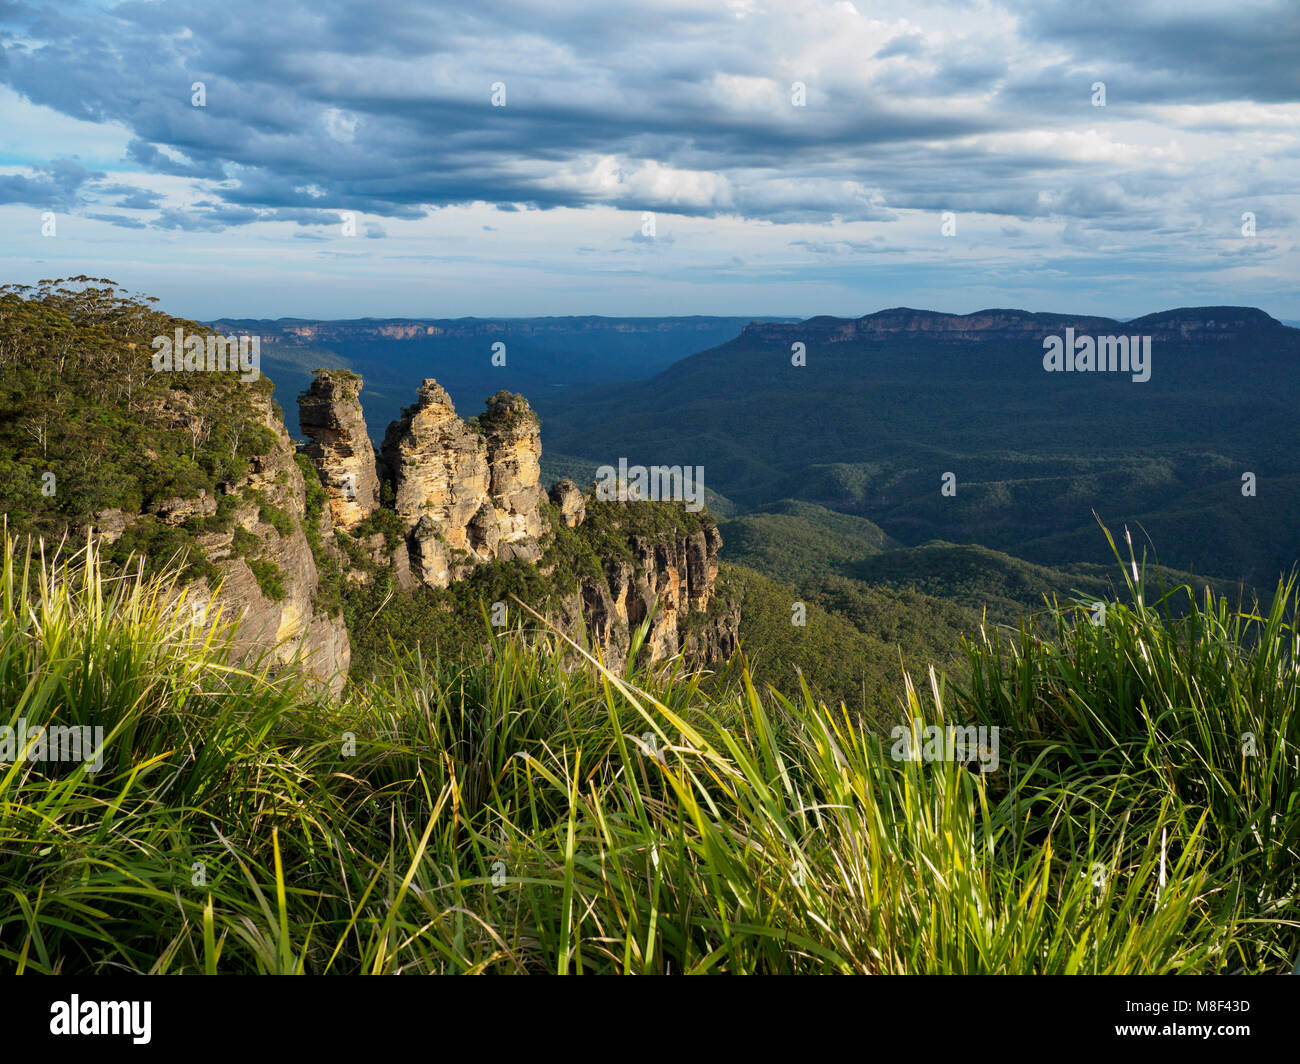 Australia, New South Wales, Blue Mountains, Landscape of Three Sisters and mountain range in background Stock Photo